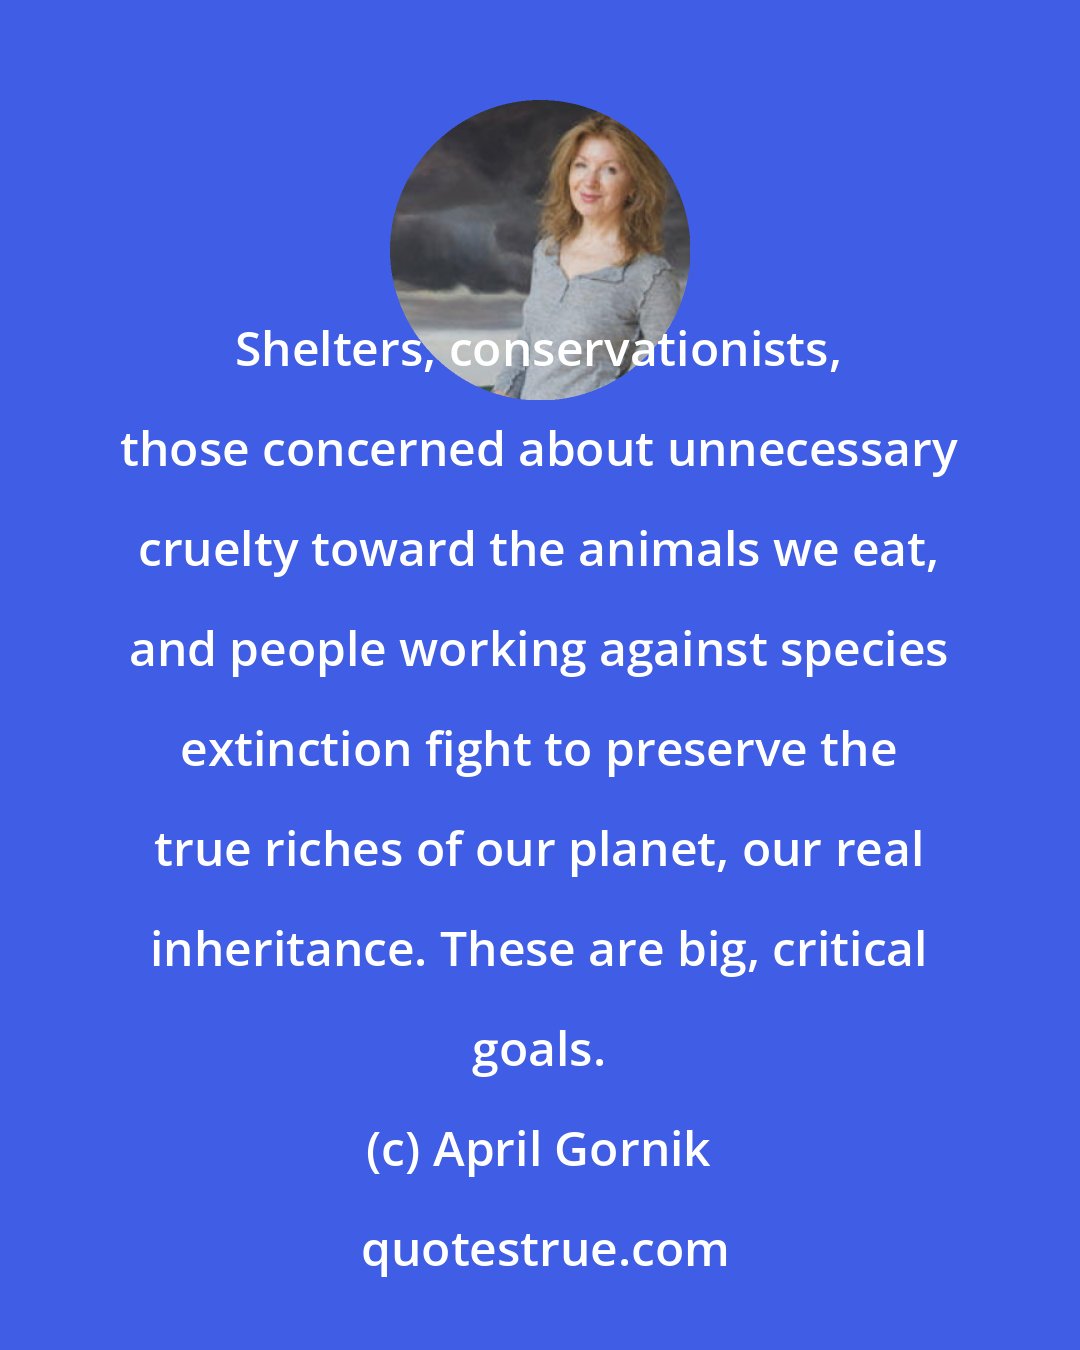 April Gornik: Shelters, conservationists, those concerned about unnecessary cruelty toward the animals we eat, and people working against species extinction fight to preserve the true riches of our planet, our real inheritance. These are big, critical goals.